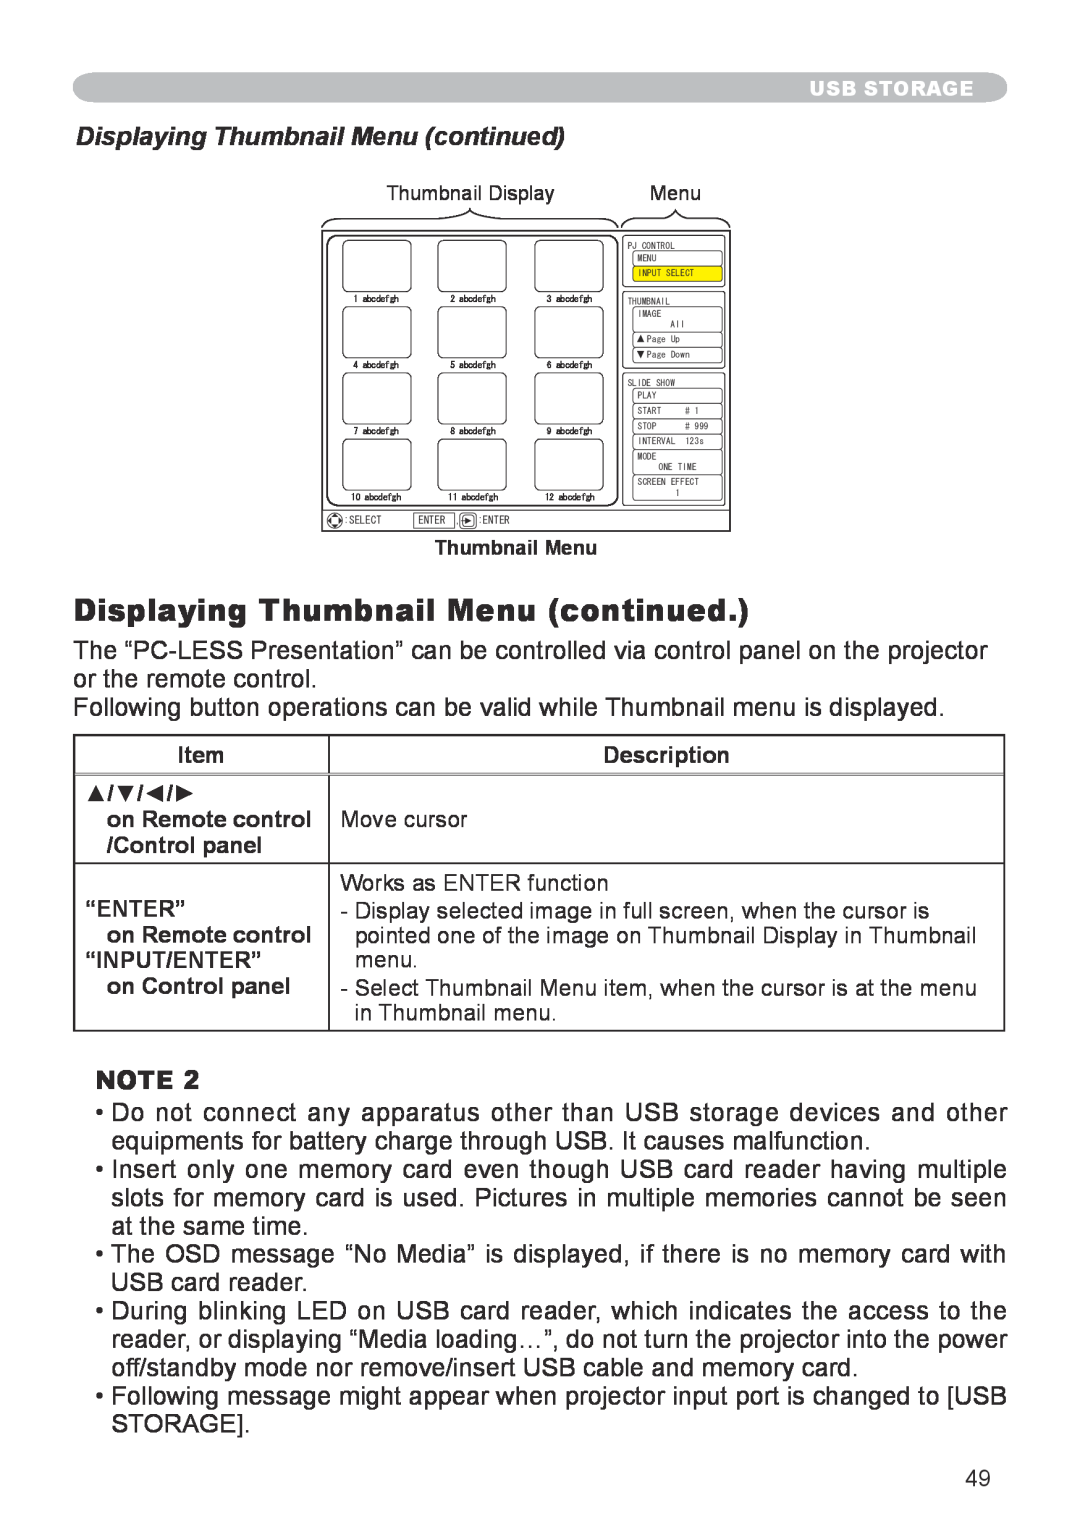 Apple CPX1, CPX5 user manual Displaying Thumbnail Menu continued 